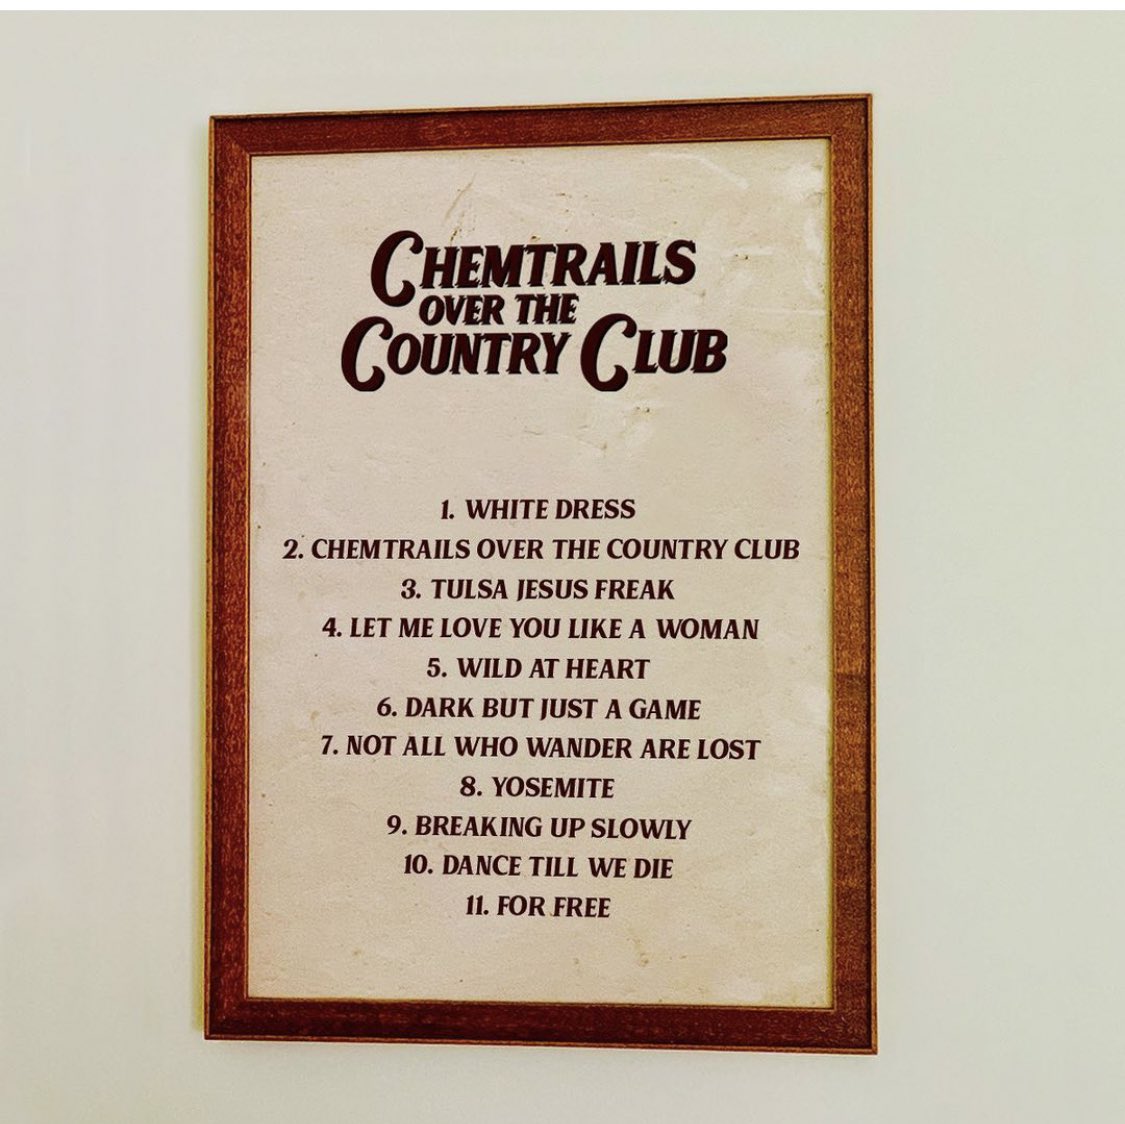 Twitter 上的 Lana Del Rey Latest："LANA DEL REY - CHEMTRAILS OVER THE COUNTRY  CLUB (TRACKLIST) https://t.co/nkxZFWZ2kB" / Twitter